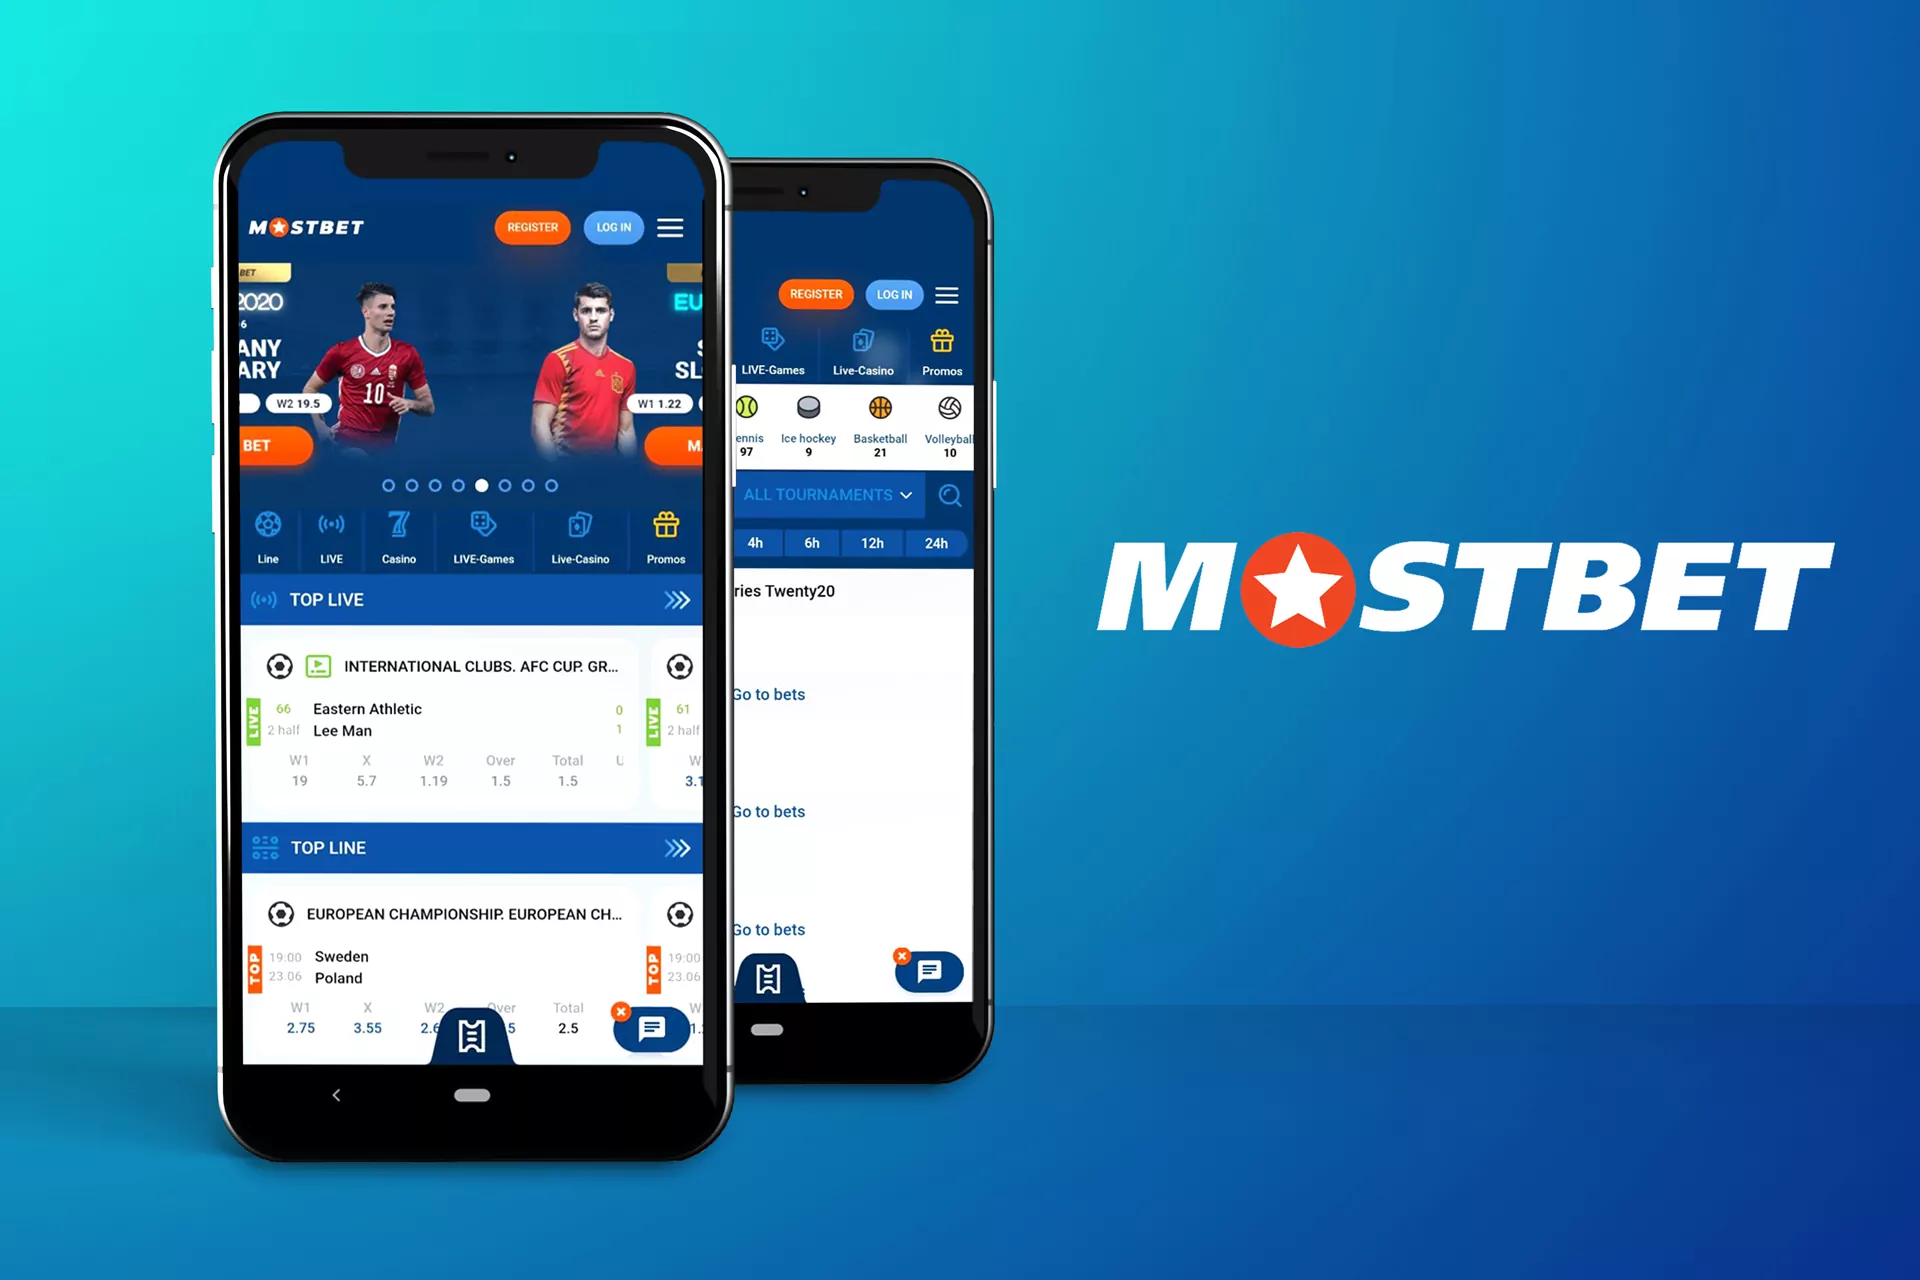 Download the Mostbet app for Android or iOS to be capable place bets on your smartphone.